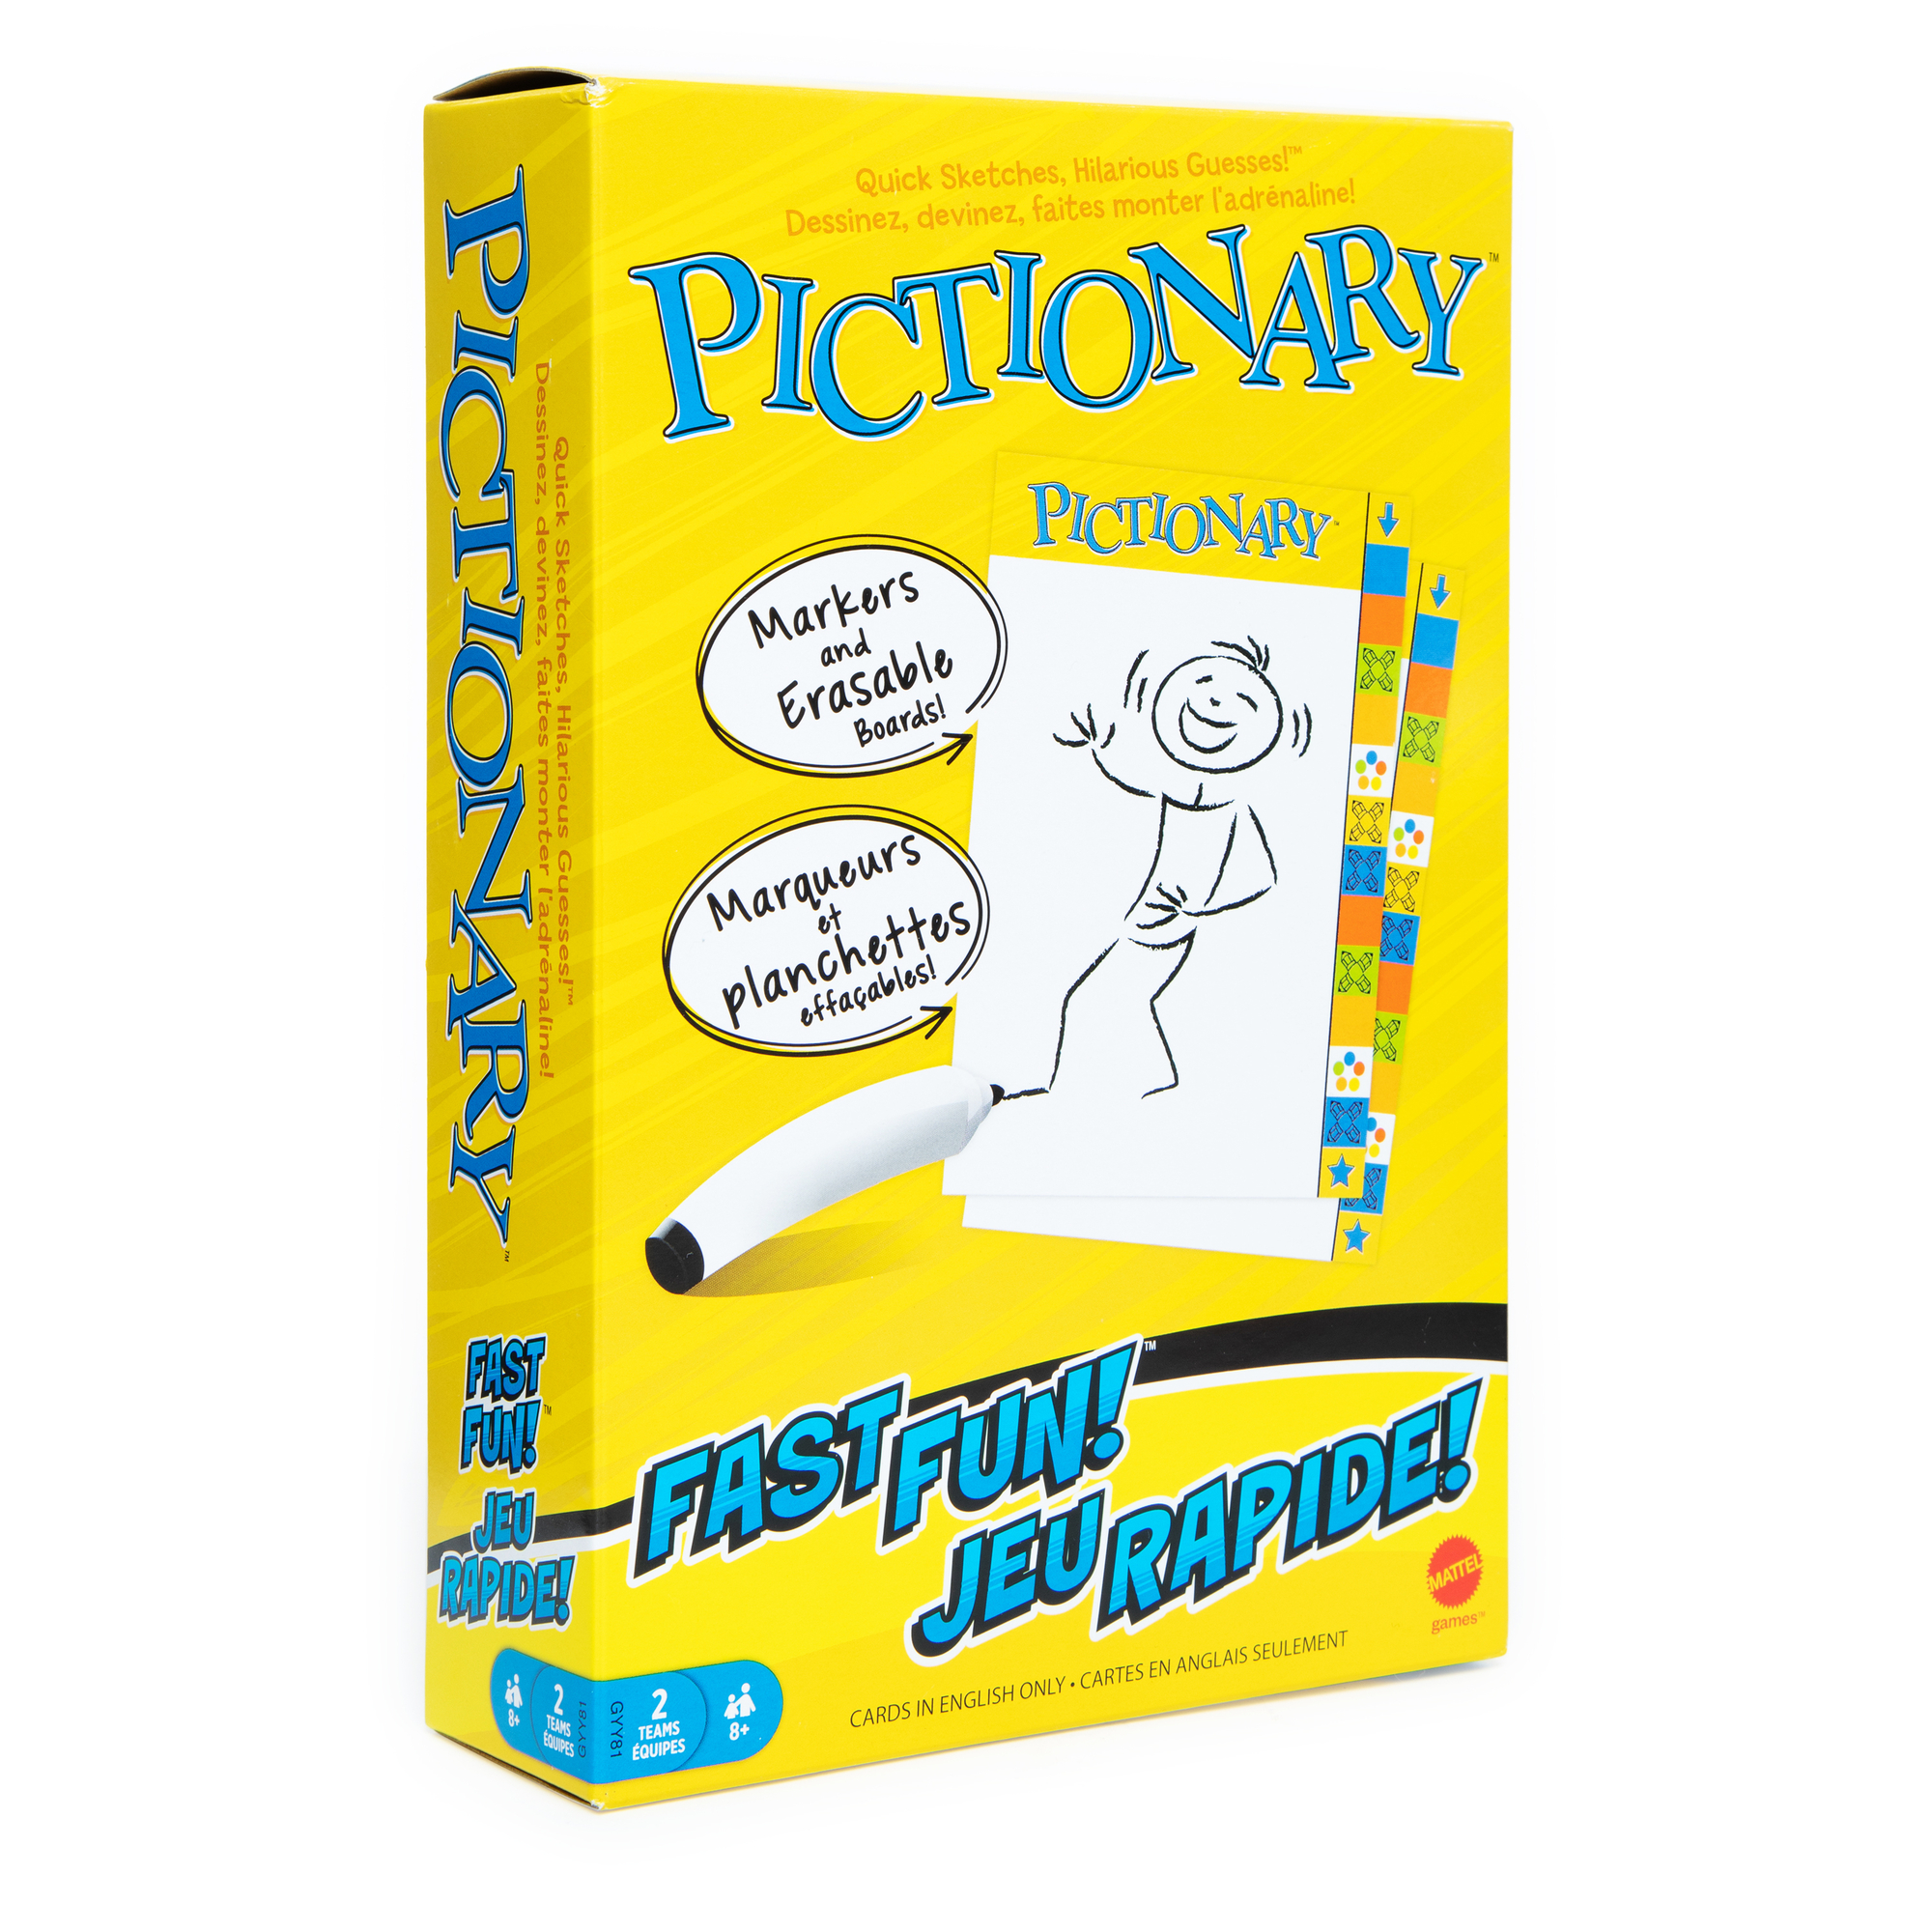 Pictionary™ Game Fast Fun!™ Edition